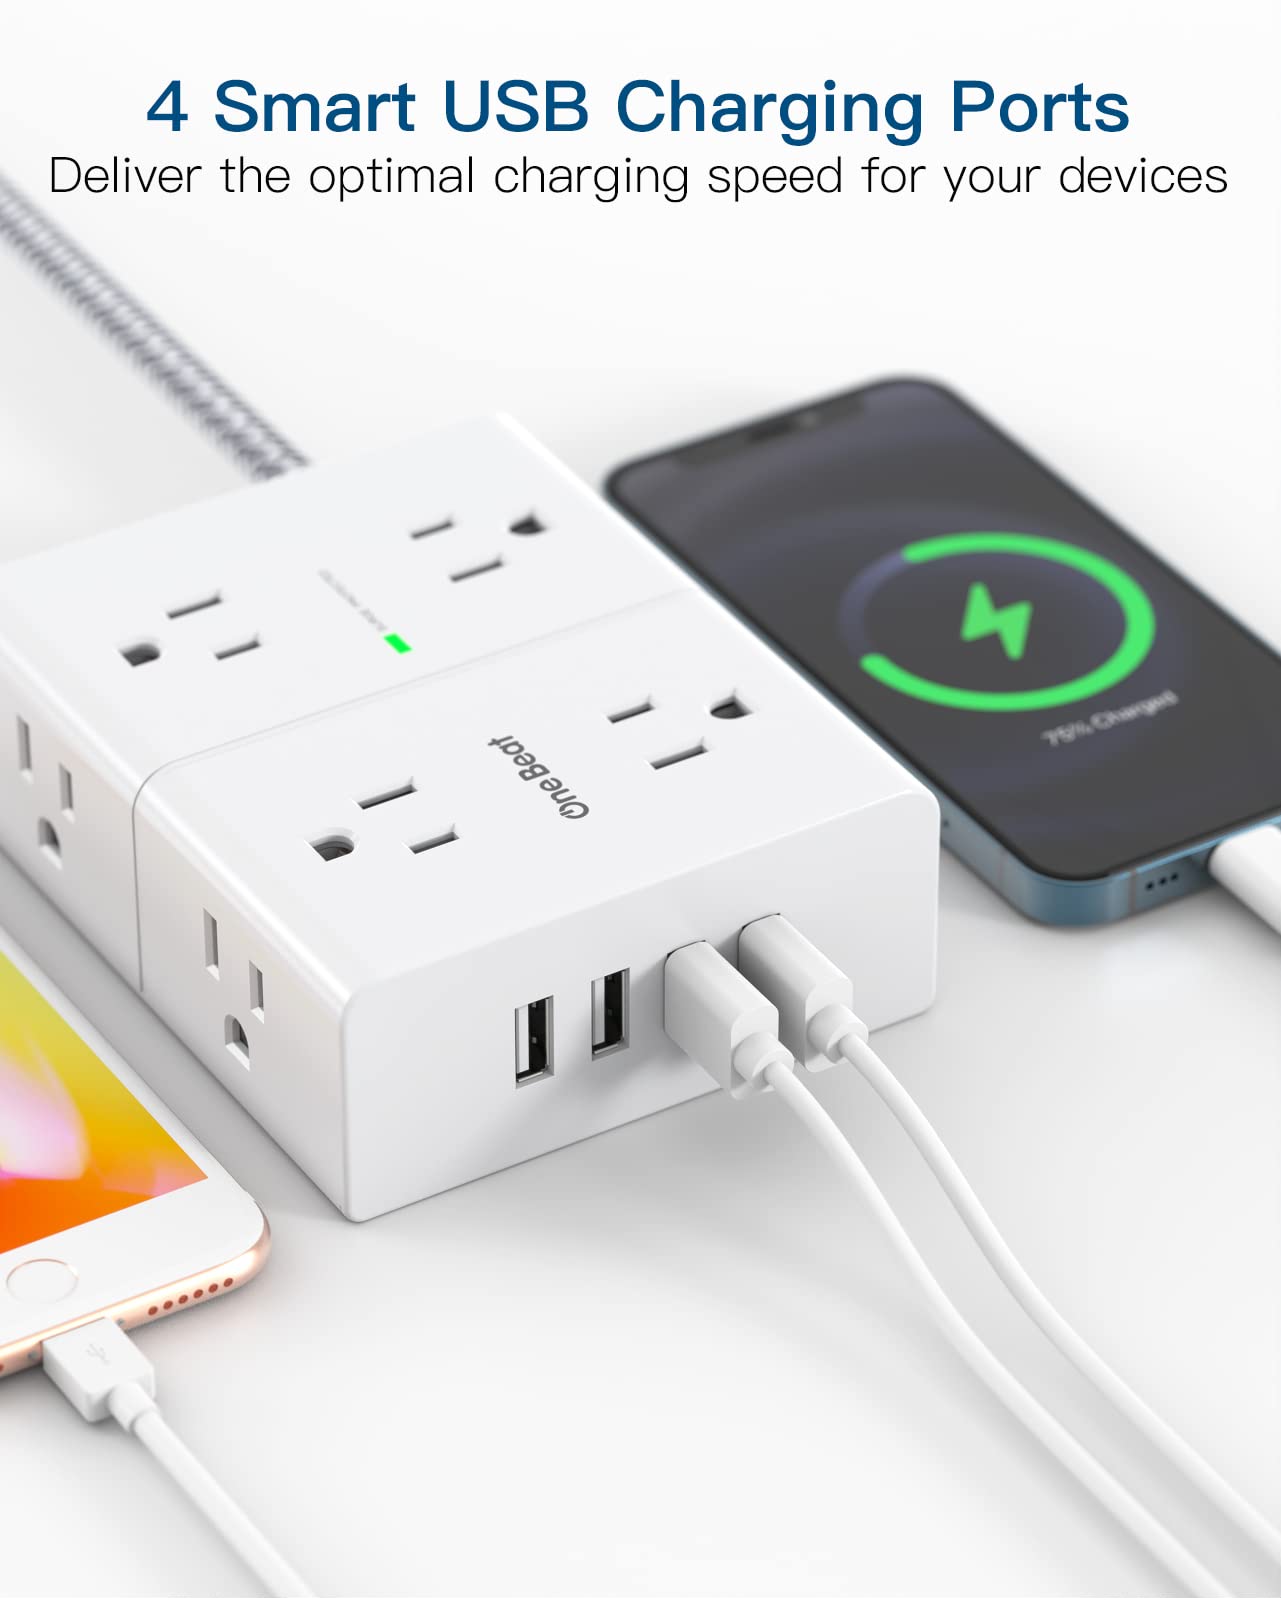 Power Strip Surge Protector with USB, Widely AC Outlet Extension Cord Flat Plug Desktop Charging Station